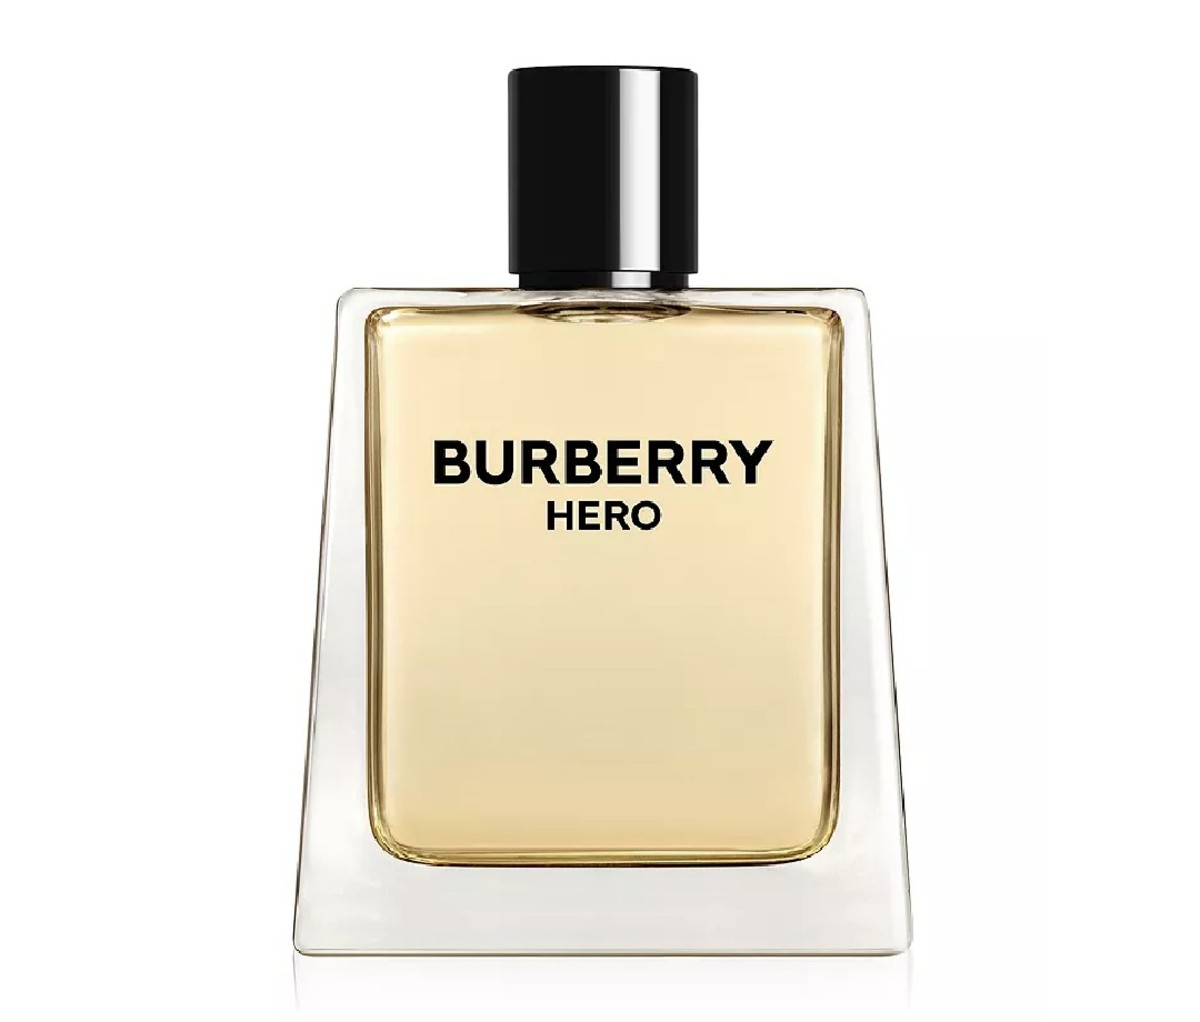 A bottle of Burberry Hero.